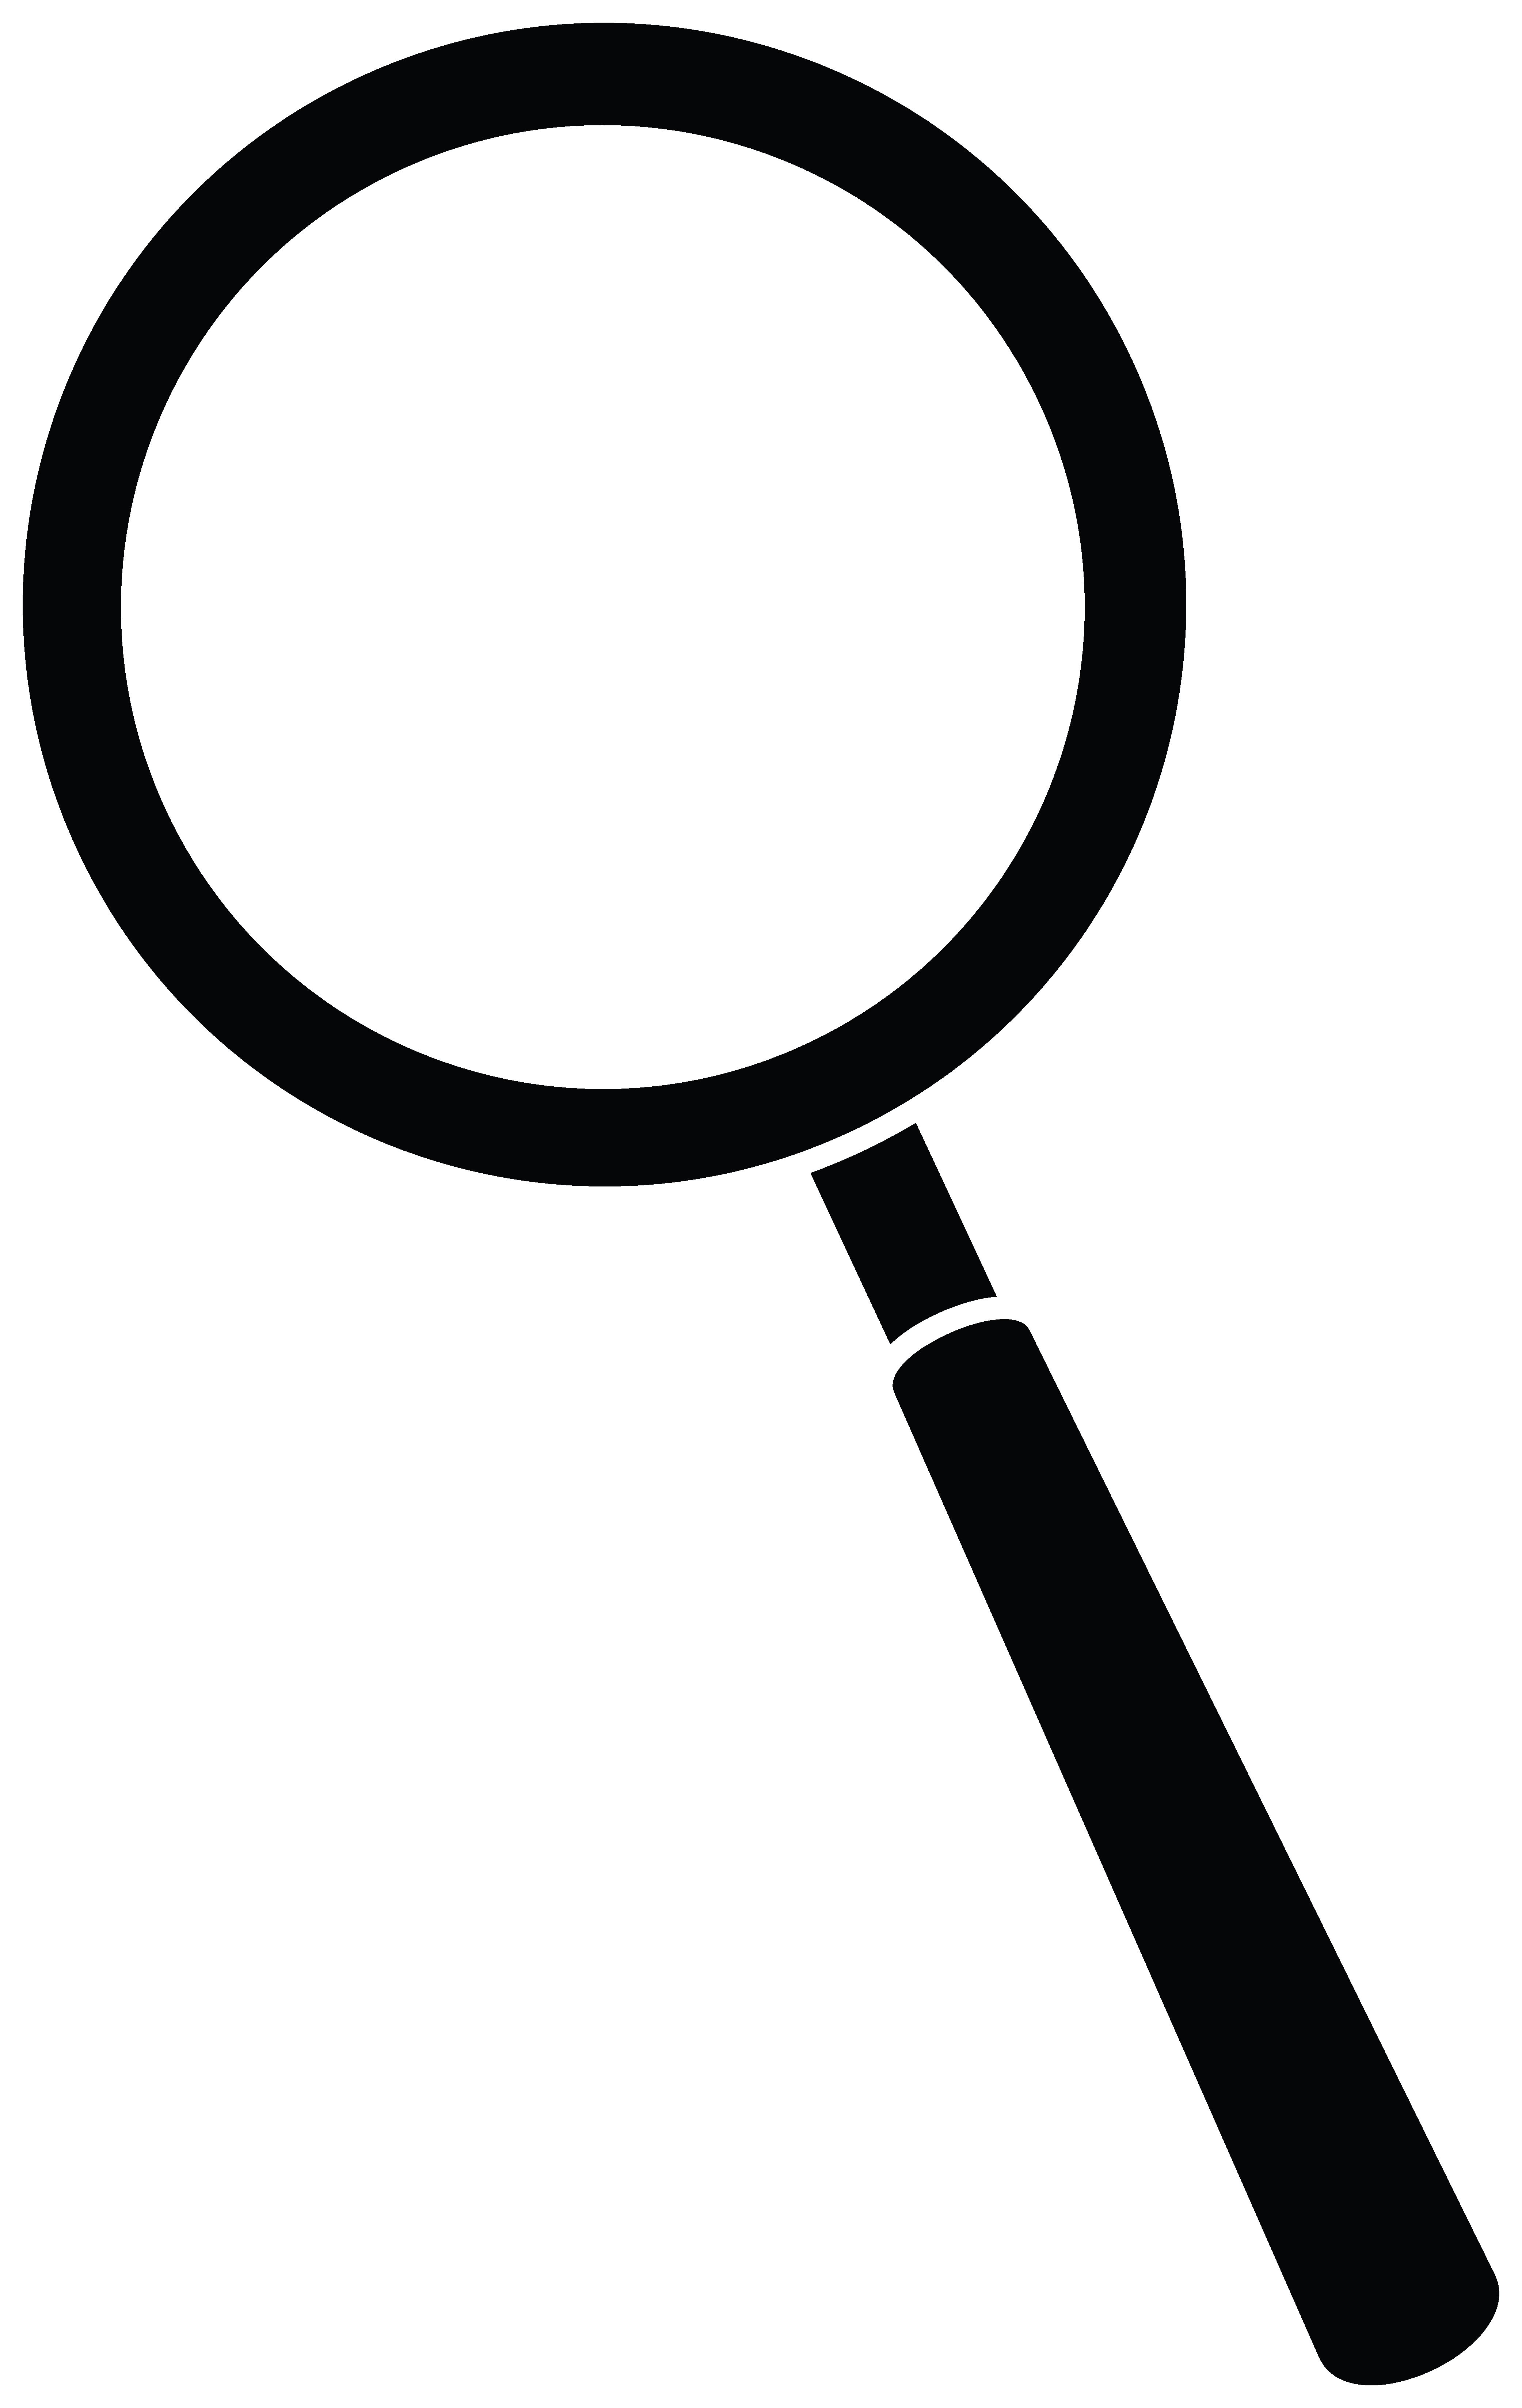 White clipart magnifying glass. Detective silhouette clip art